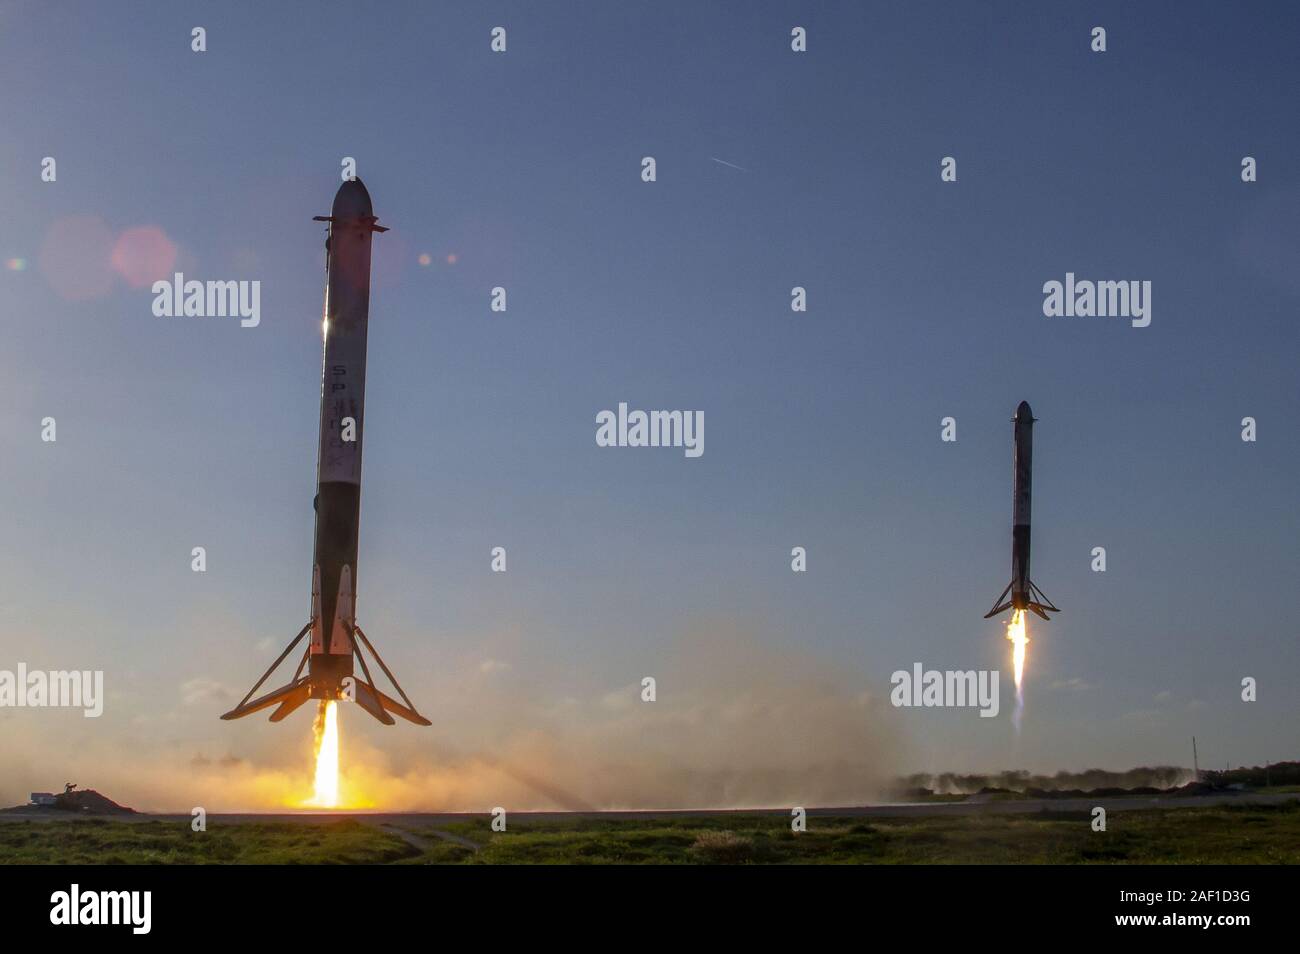 A SpaceX Falcon Heavy rocket successfully launched the Arabsat-6A satellite from Launch Complex 39A (LC-39A) at NASA's Kennedy Space Center in Florida on April 11, 2019. The satellite was deployed approximately 34 minutes after liftoff. Following booster separation, Falcon Heavy's two side boosters landed at SpaceX's Landing Zones 1 and 2 (LZ-1 and LZ-2) at Cape Canaveral Air Force Station in Florida. Falcon Heavy's center core landed on the 'Of Course I Still Love You' drone-ship, which was stationed in the Atlantic Ocean. Photo by SpaceX/UPI Stock Photo